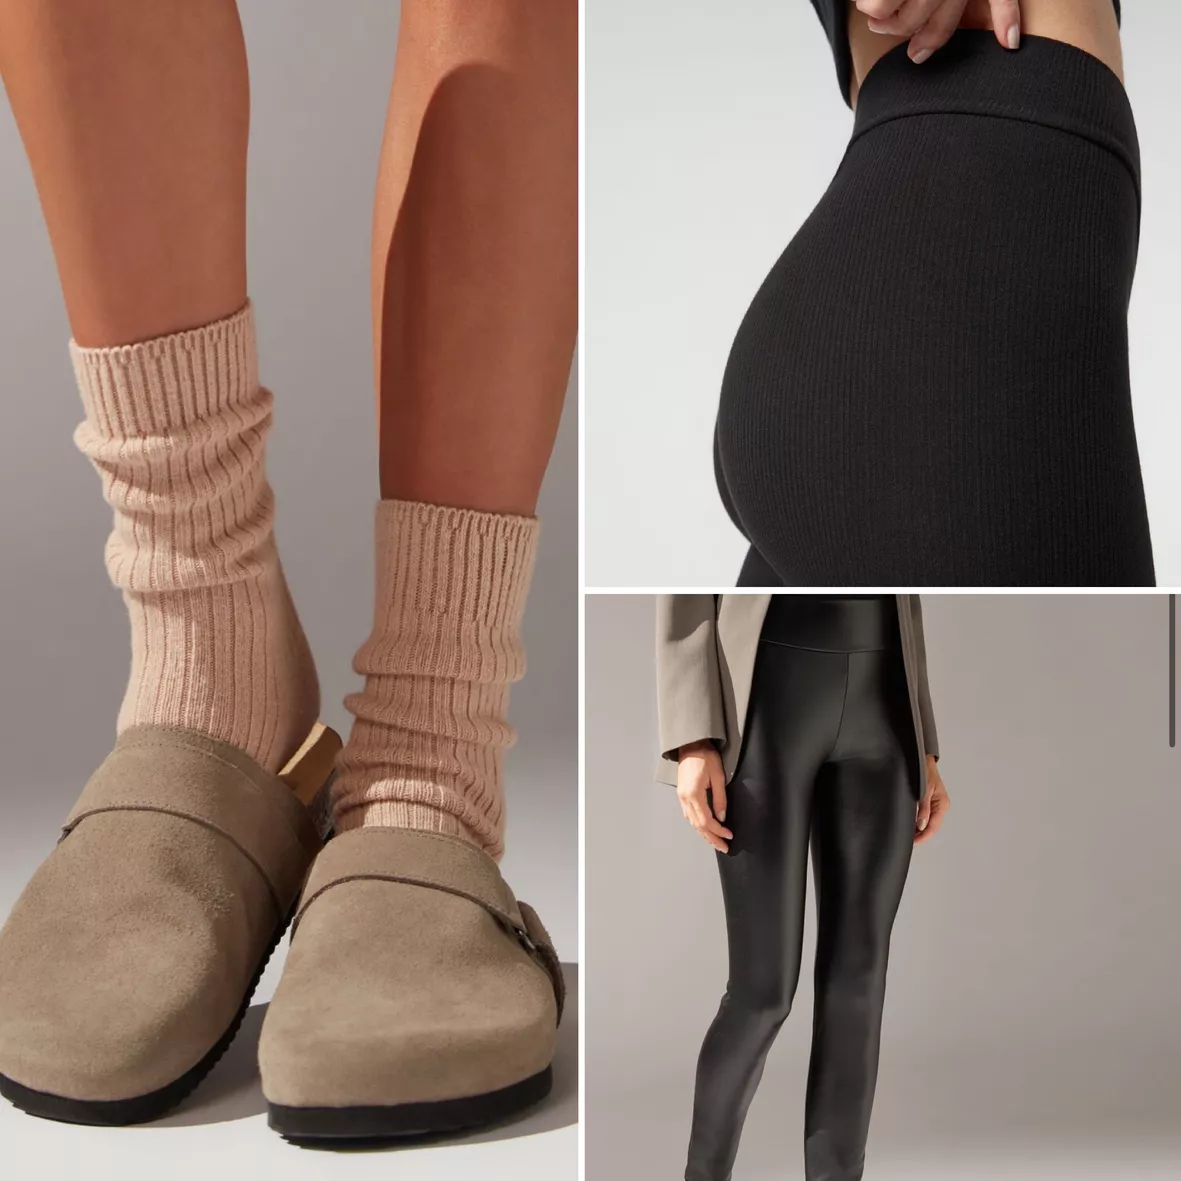 Ribbed Tights with Cashmere - Calzedonia